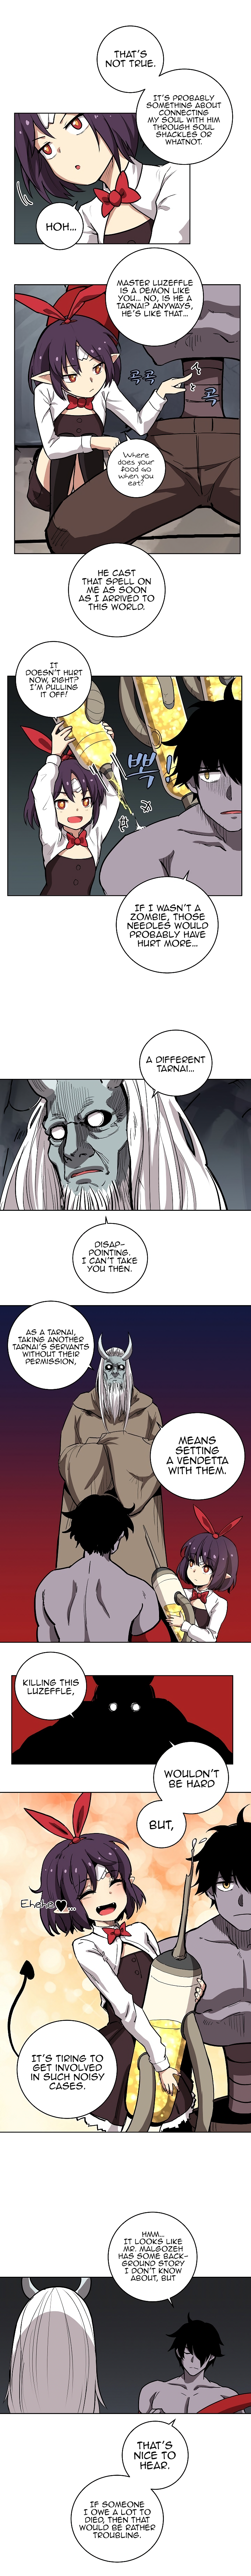 The Dungeon Master Chapter 9 page 8